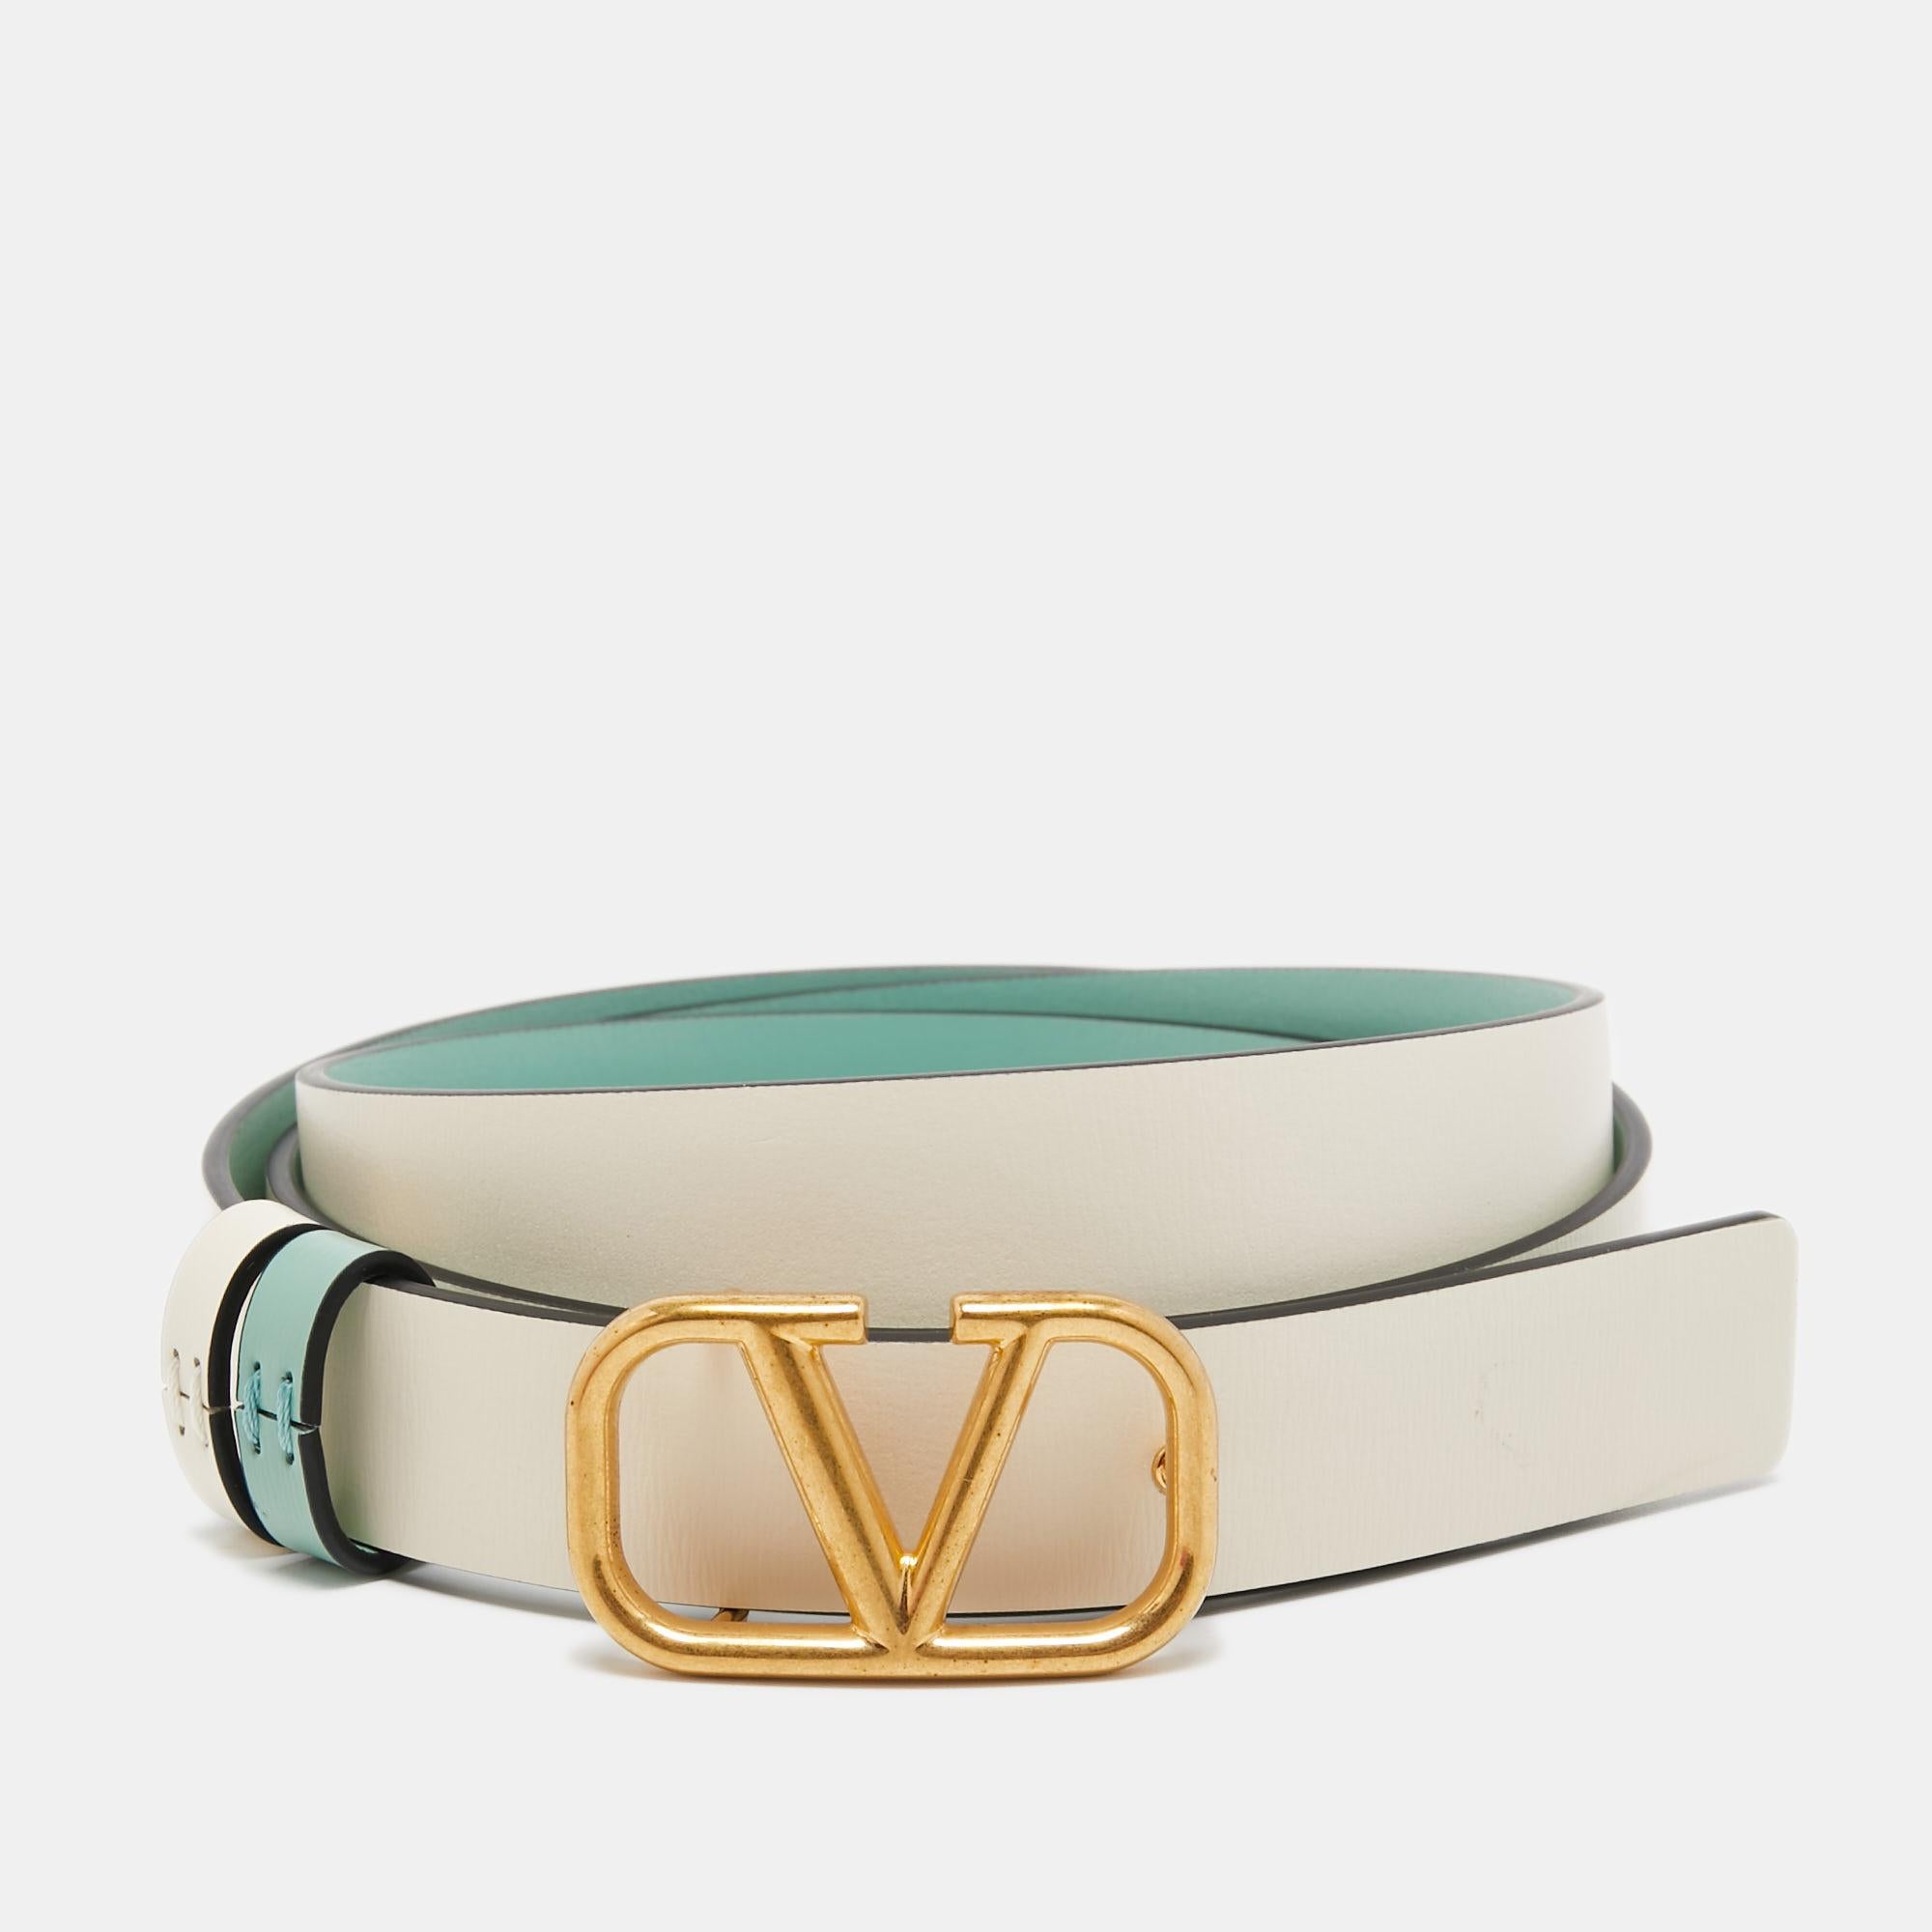 Belts are fine accessories to upgrade any basic look to a statement-making one. We particularly love this offering by Valentino. Formed using leather, the reversible belt has a VLogo buckle for an impeccable finish.

Includes: Original Box, Info